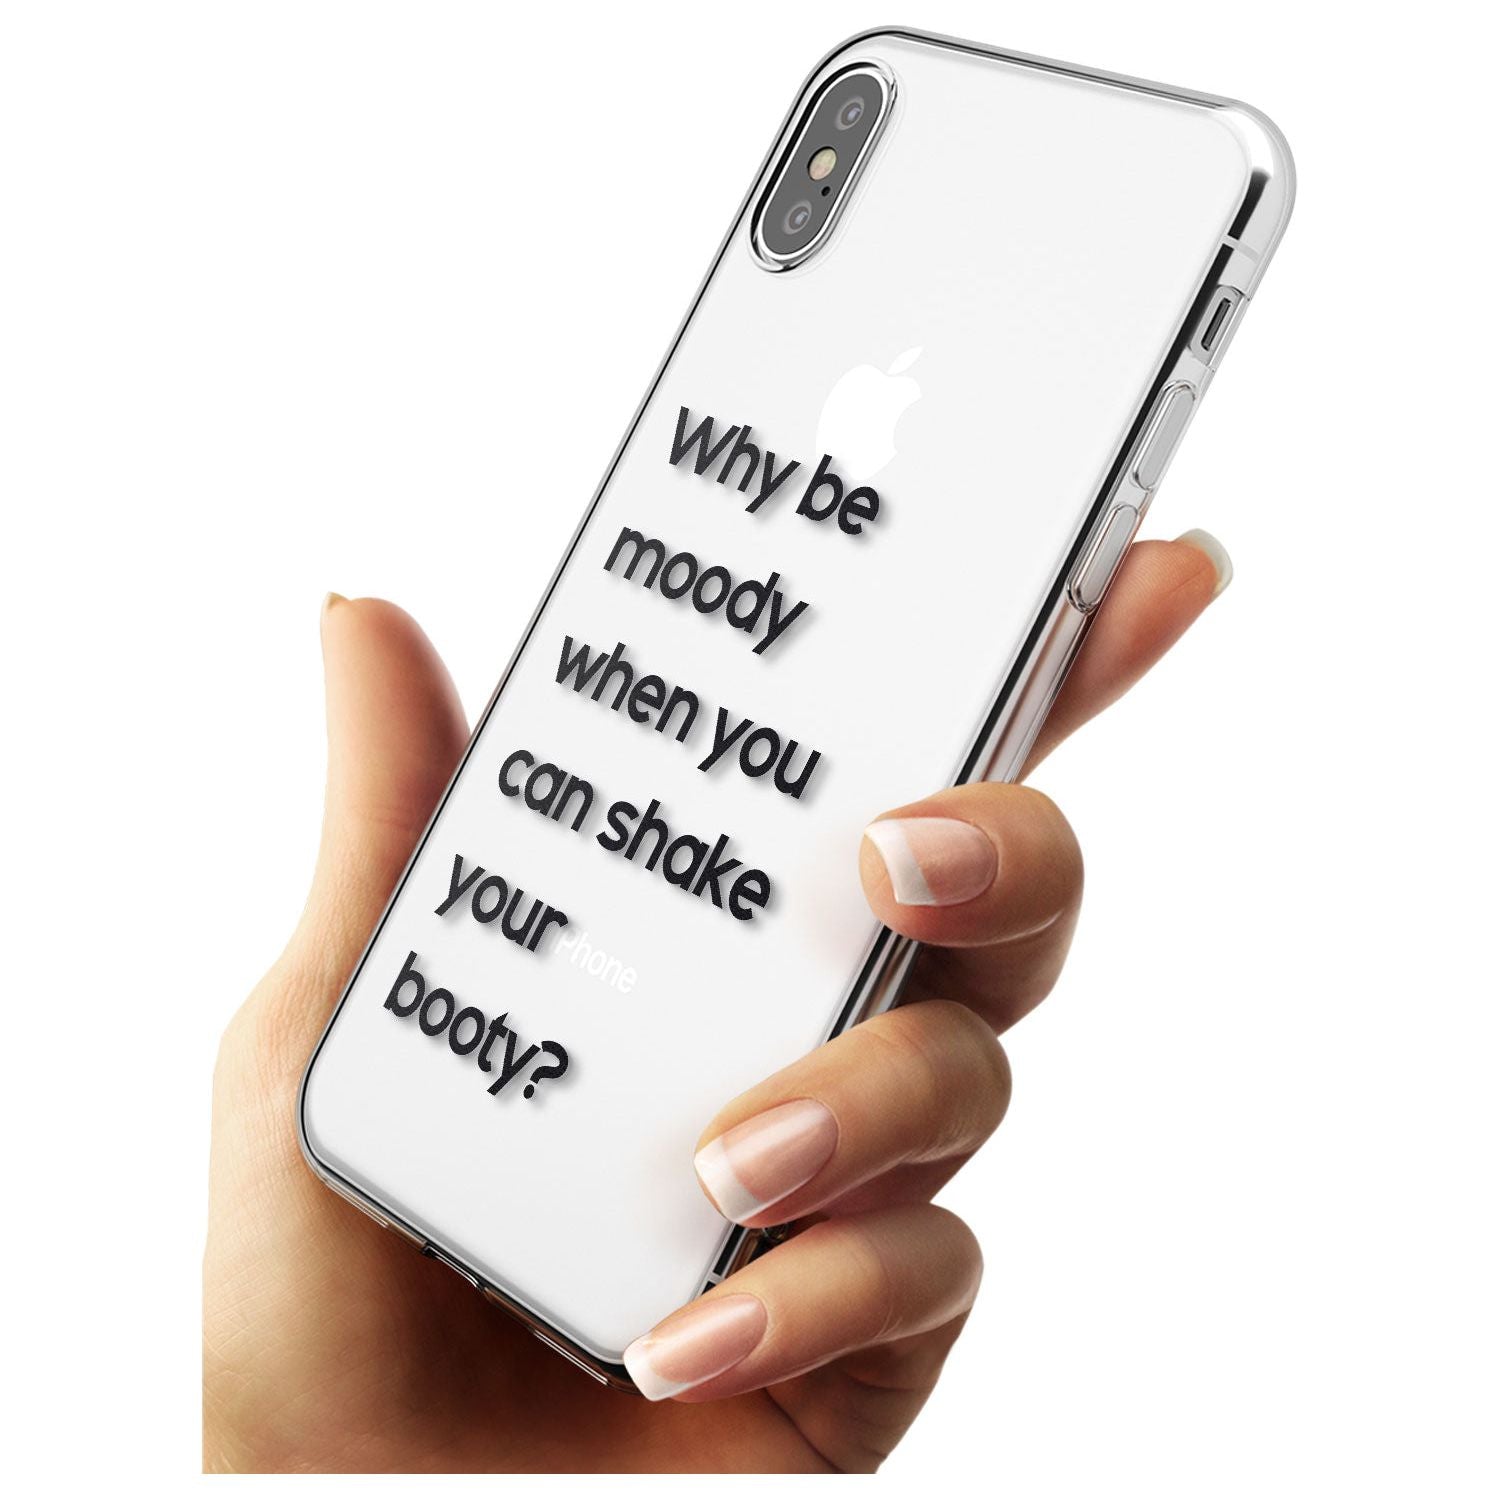 Why be moody? Black Impact Phone Case for iPhone X XS Max XR